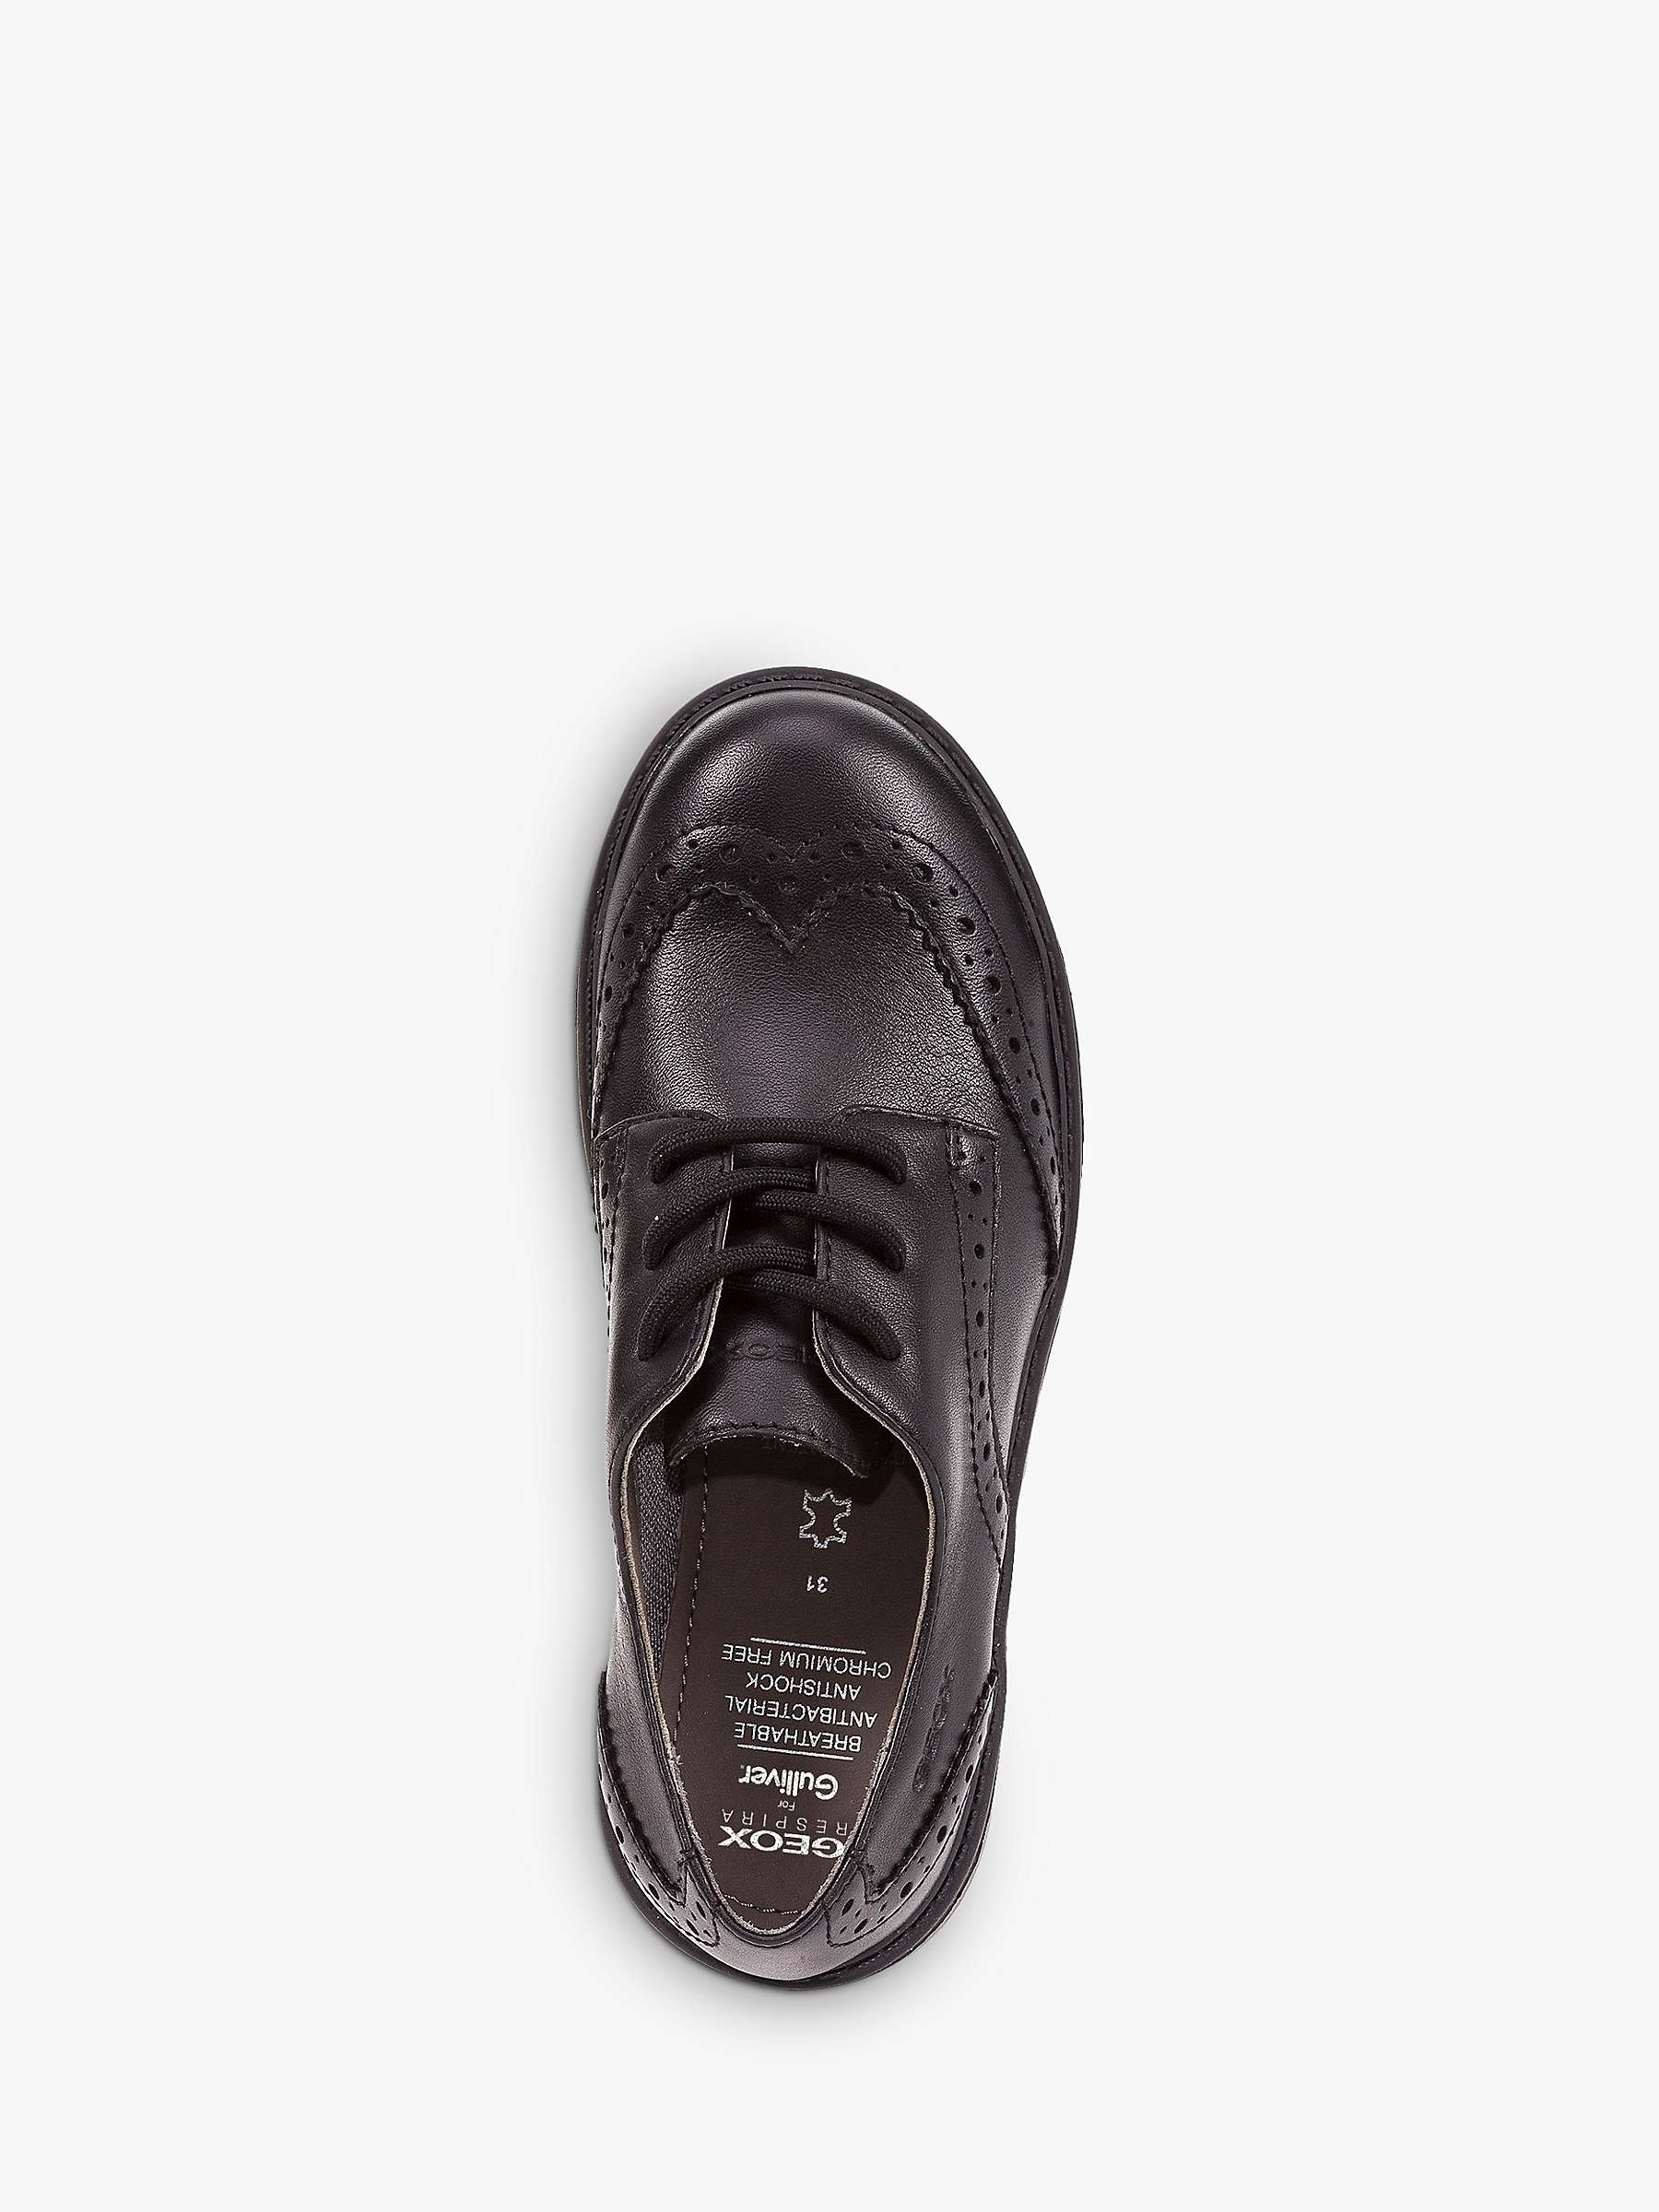 Buy Geox Kids' Casey Lace Up Brogue School Shoes, Black Online at johnlewis.com